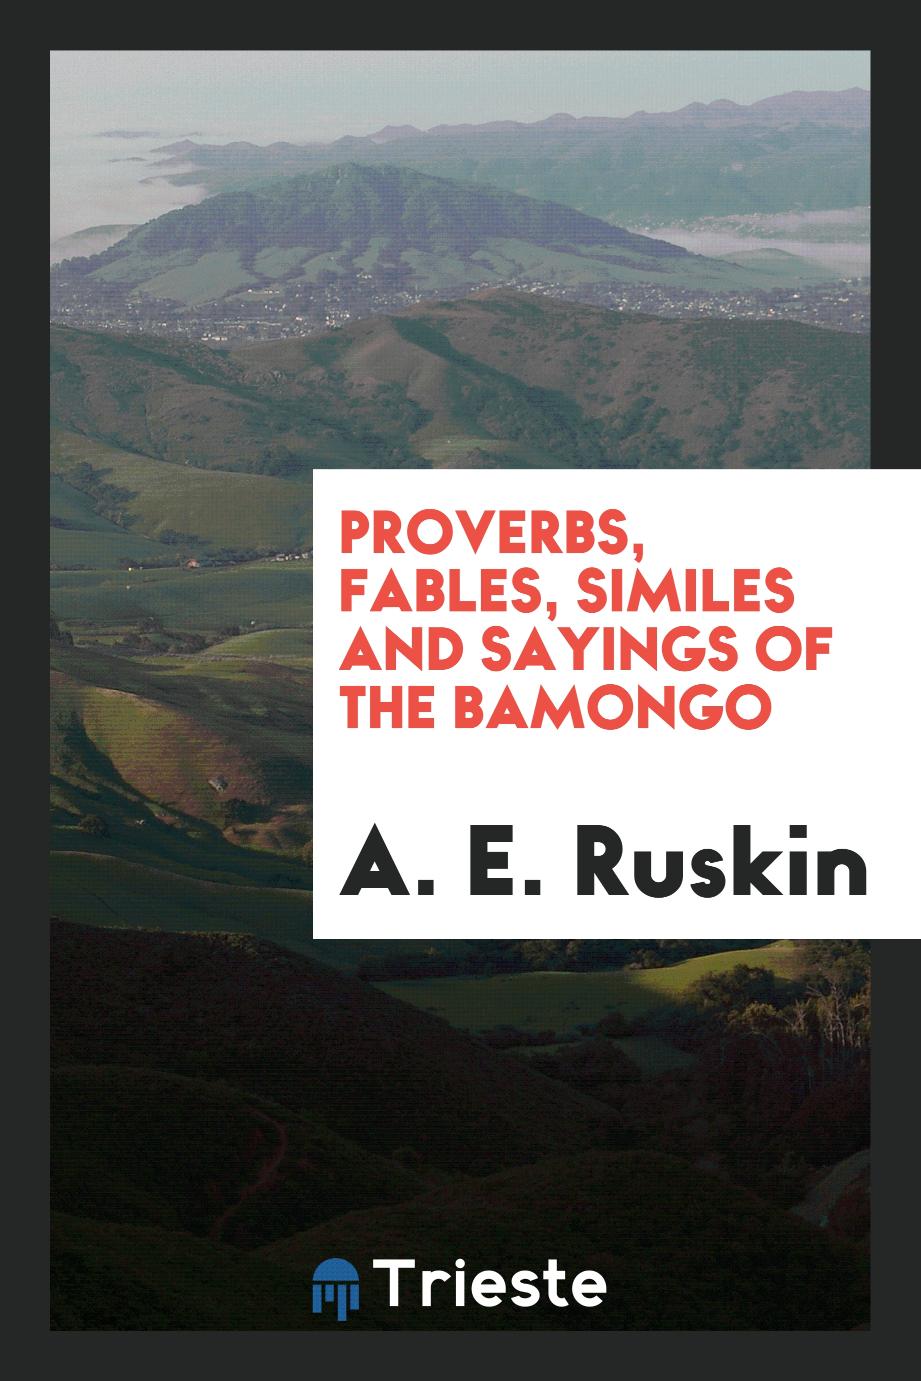 Proverbs, fables, similes and sayings of the Bamongo